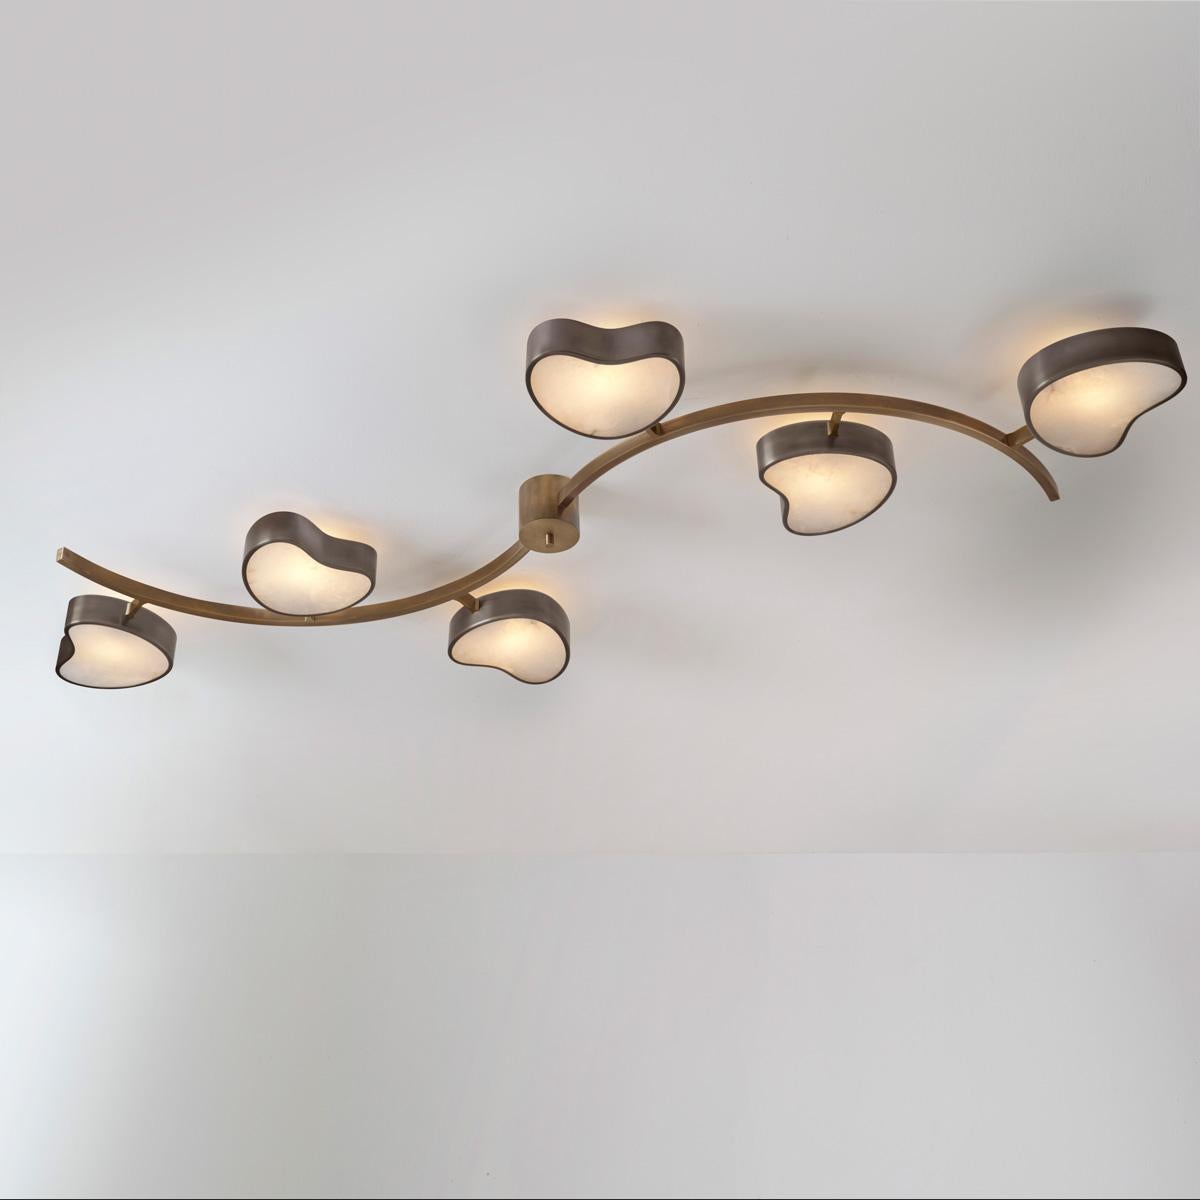 Cuore N.6 Ceiling Light by Gaspare Asaro. Satin Brass and Sand White Finish For Sale 1